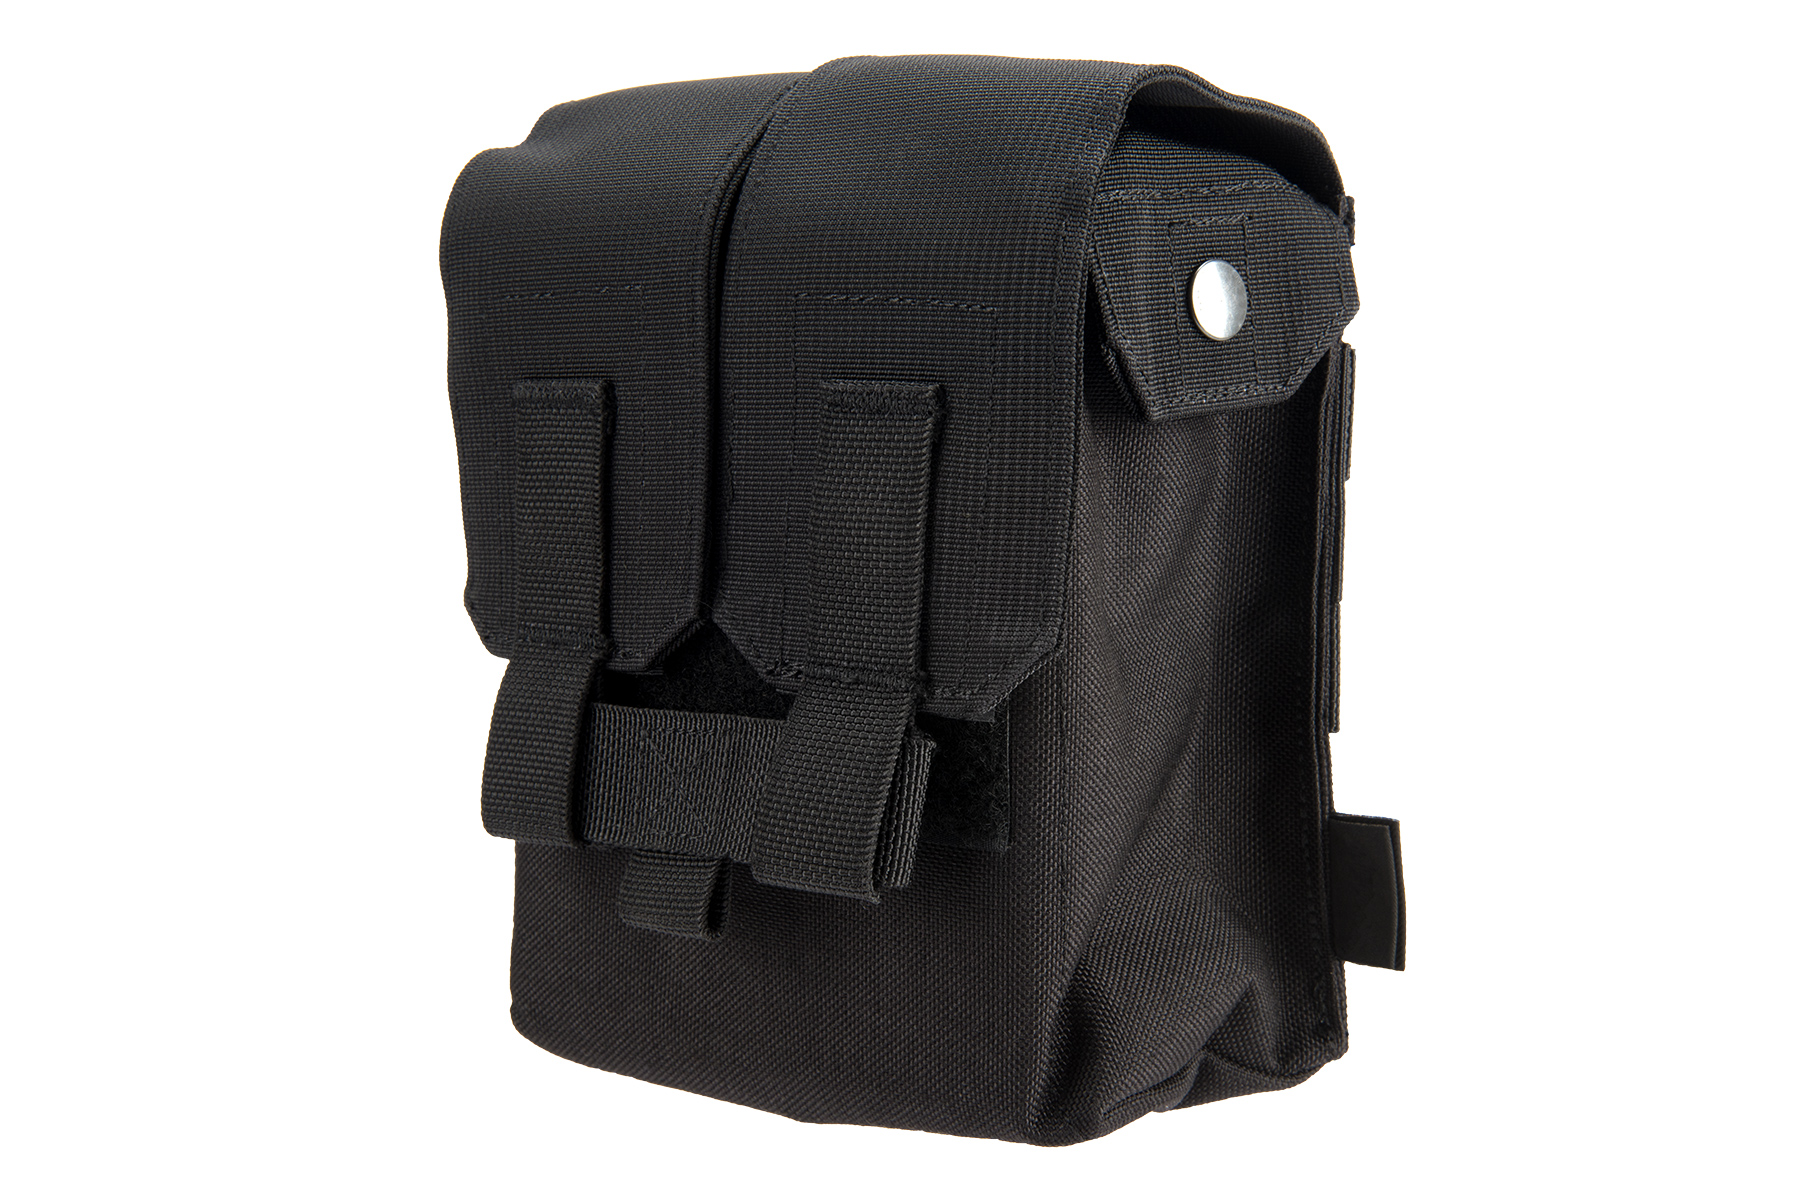 FLYYE INDUSTRIES MOLLE M249 200RD DRUM MAGAZINE POUCH - BLACK - Click Image to Close